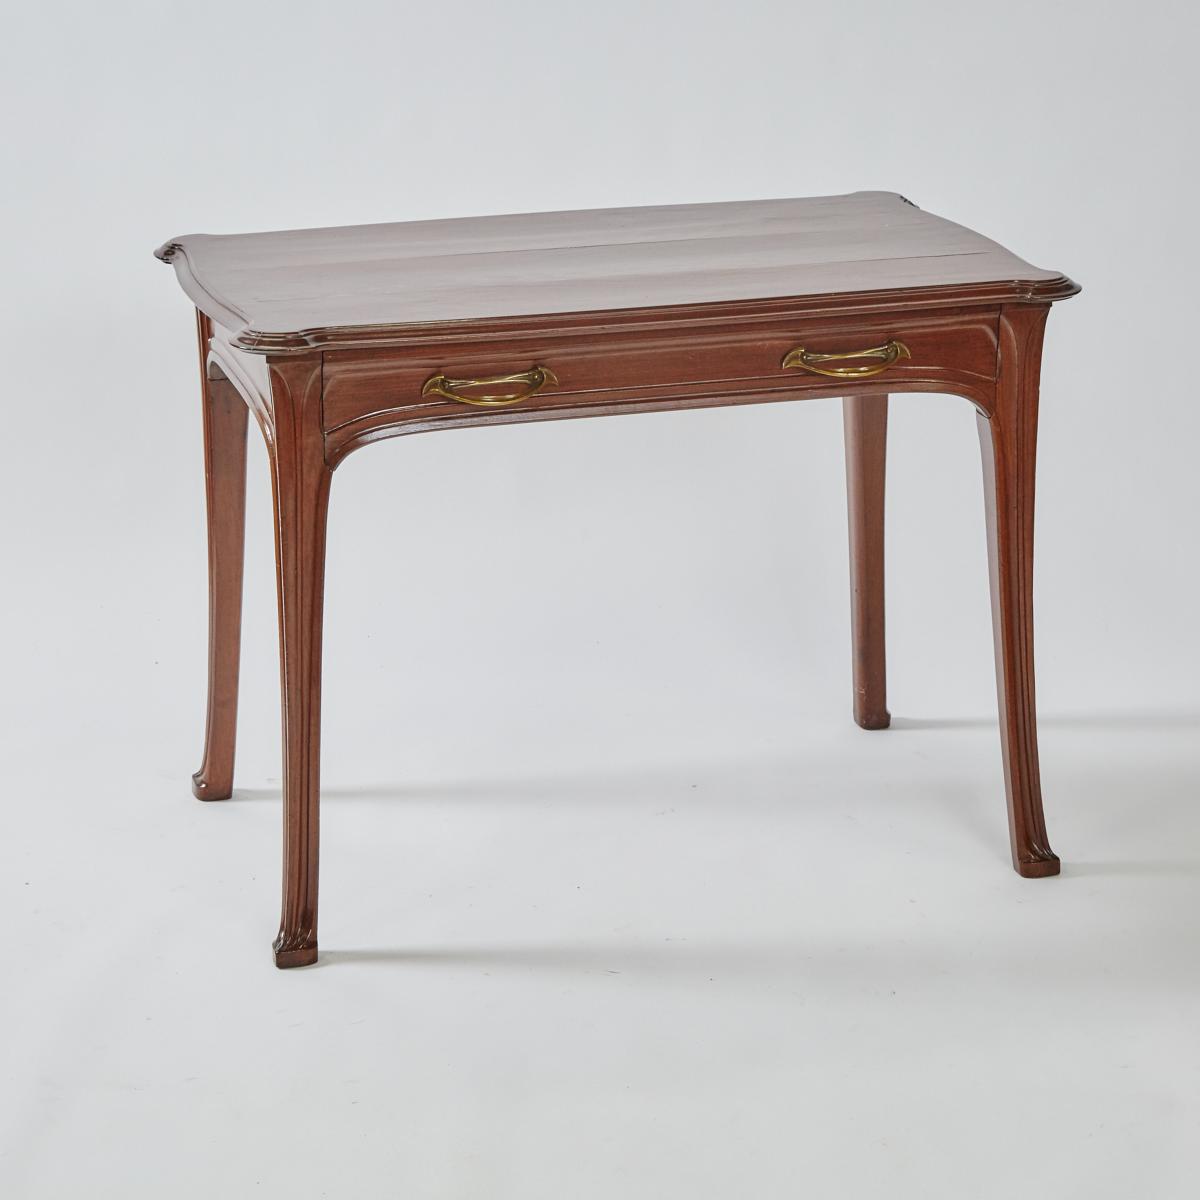 French Art Nouveau Carved Mahogany Writing Desk, 19th/early 20th century, 28.75 x 39 x 25.25 in — 73